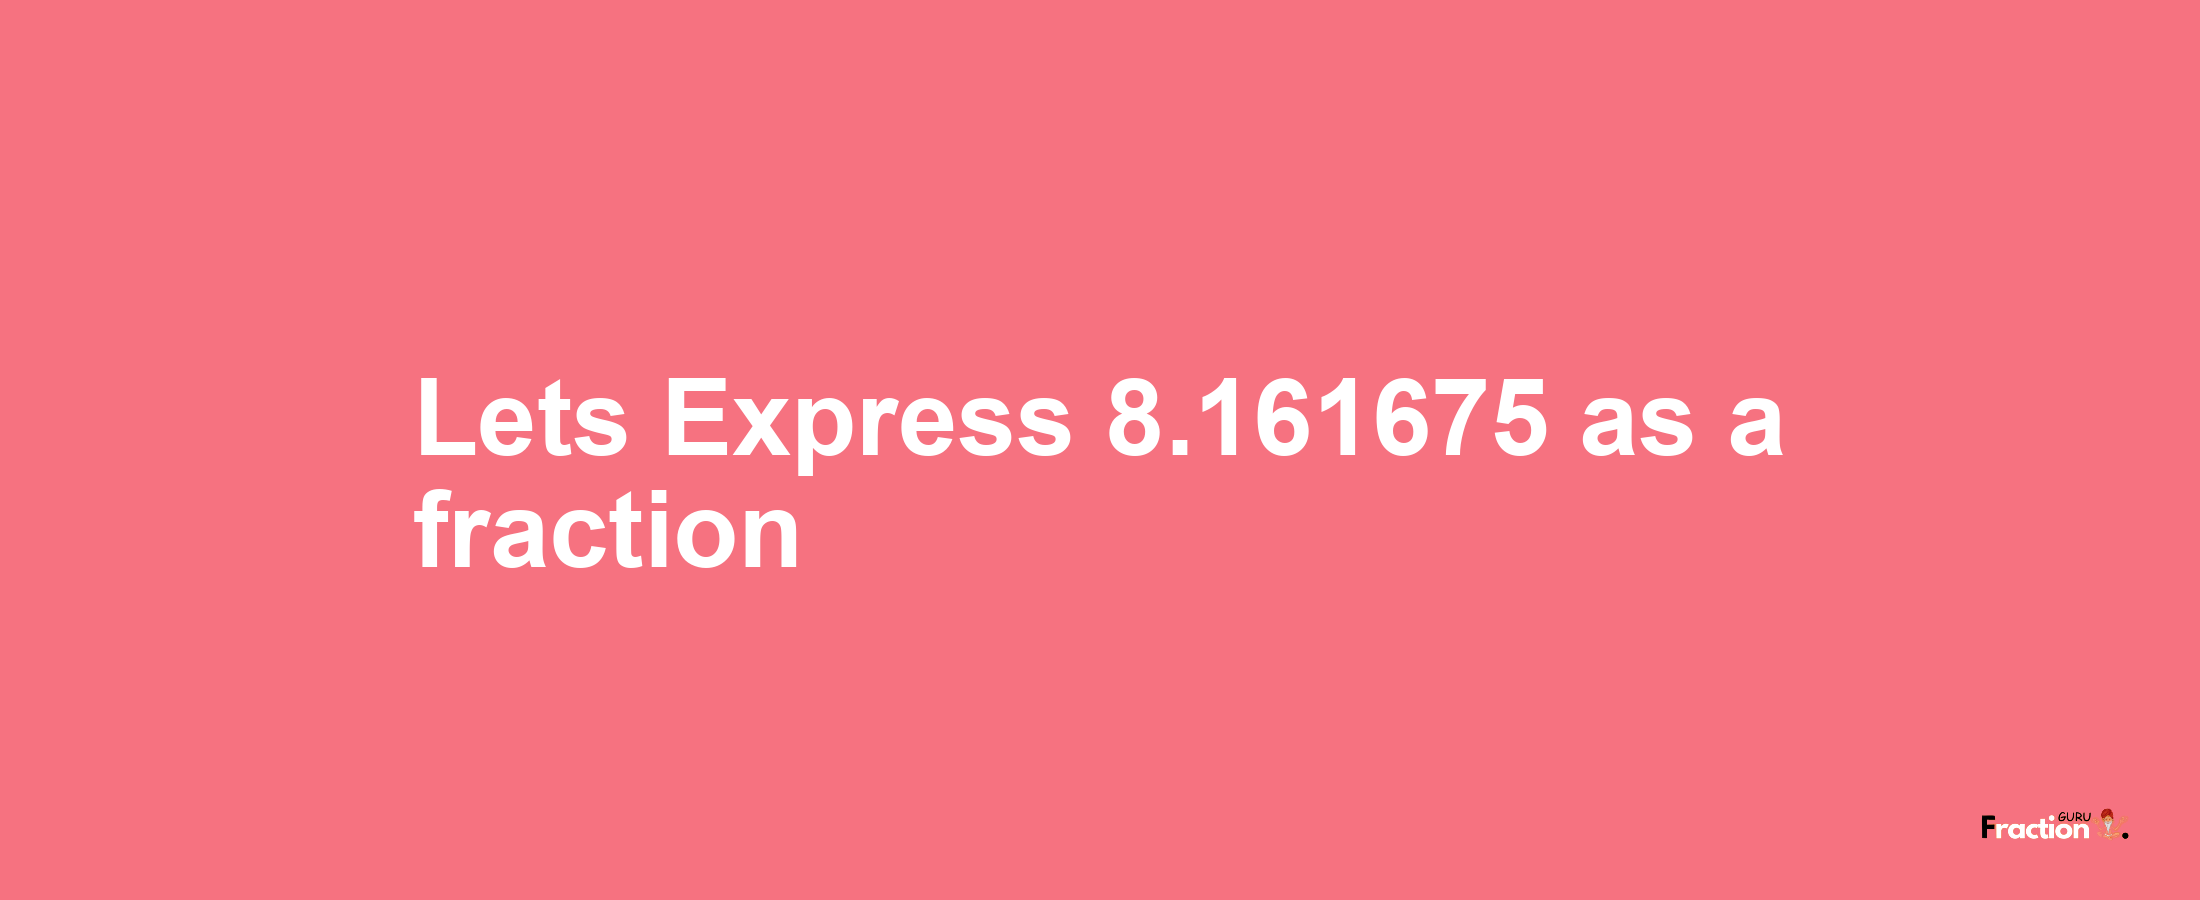 Lets Express 8.161675 as afraction